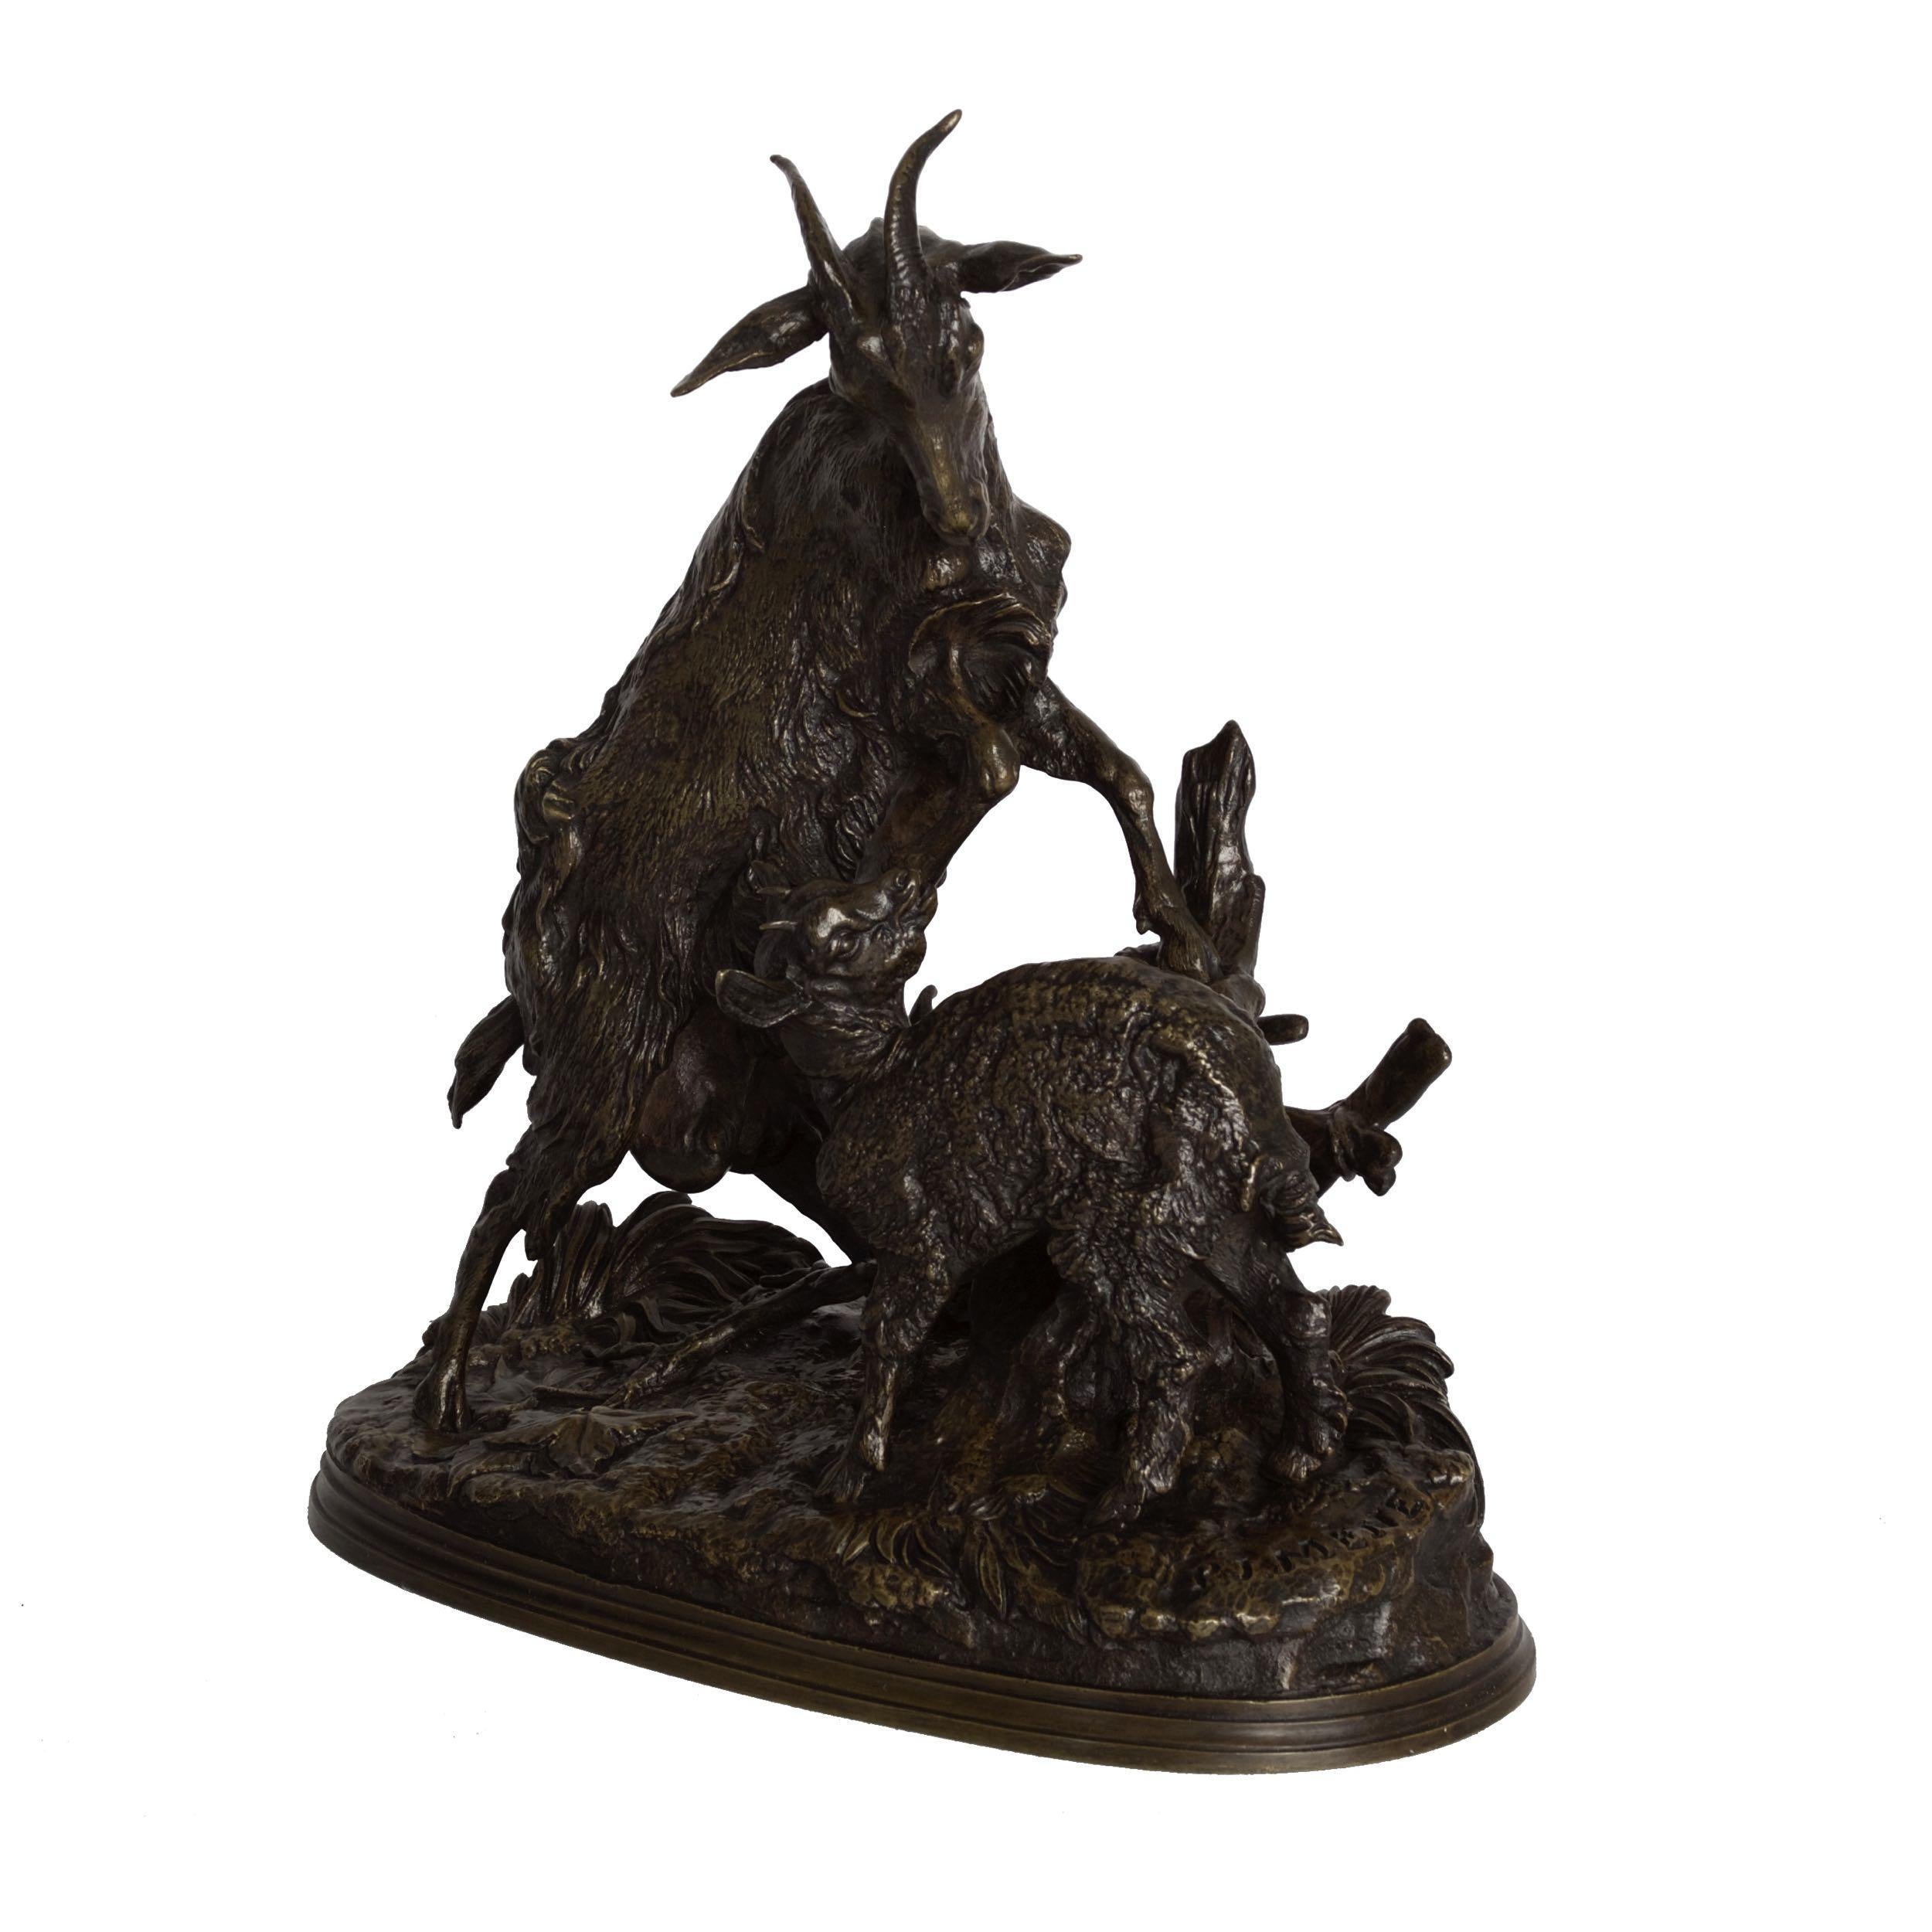 A rare and exceptional model of La Chévre et le Chevreau (The Nanny Goat and her Kid), it retains an exquisite original patina. Likely an atelier casting from Mene's own foundry, the hand chiseling and chasing executed by the foundry is exquisite,